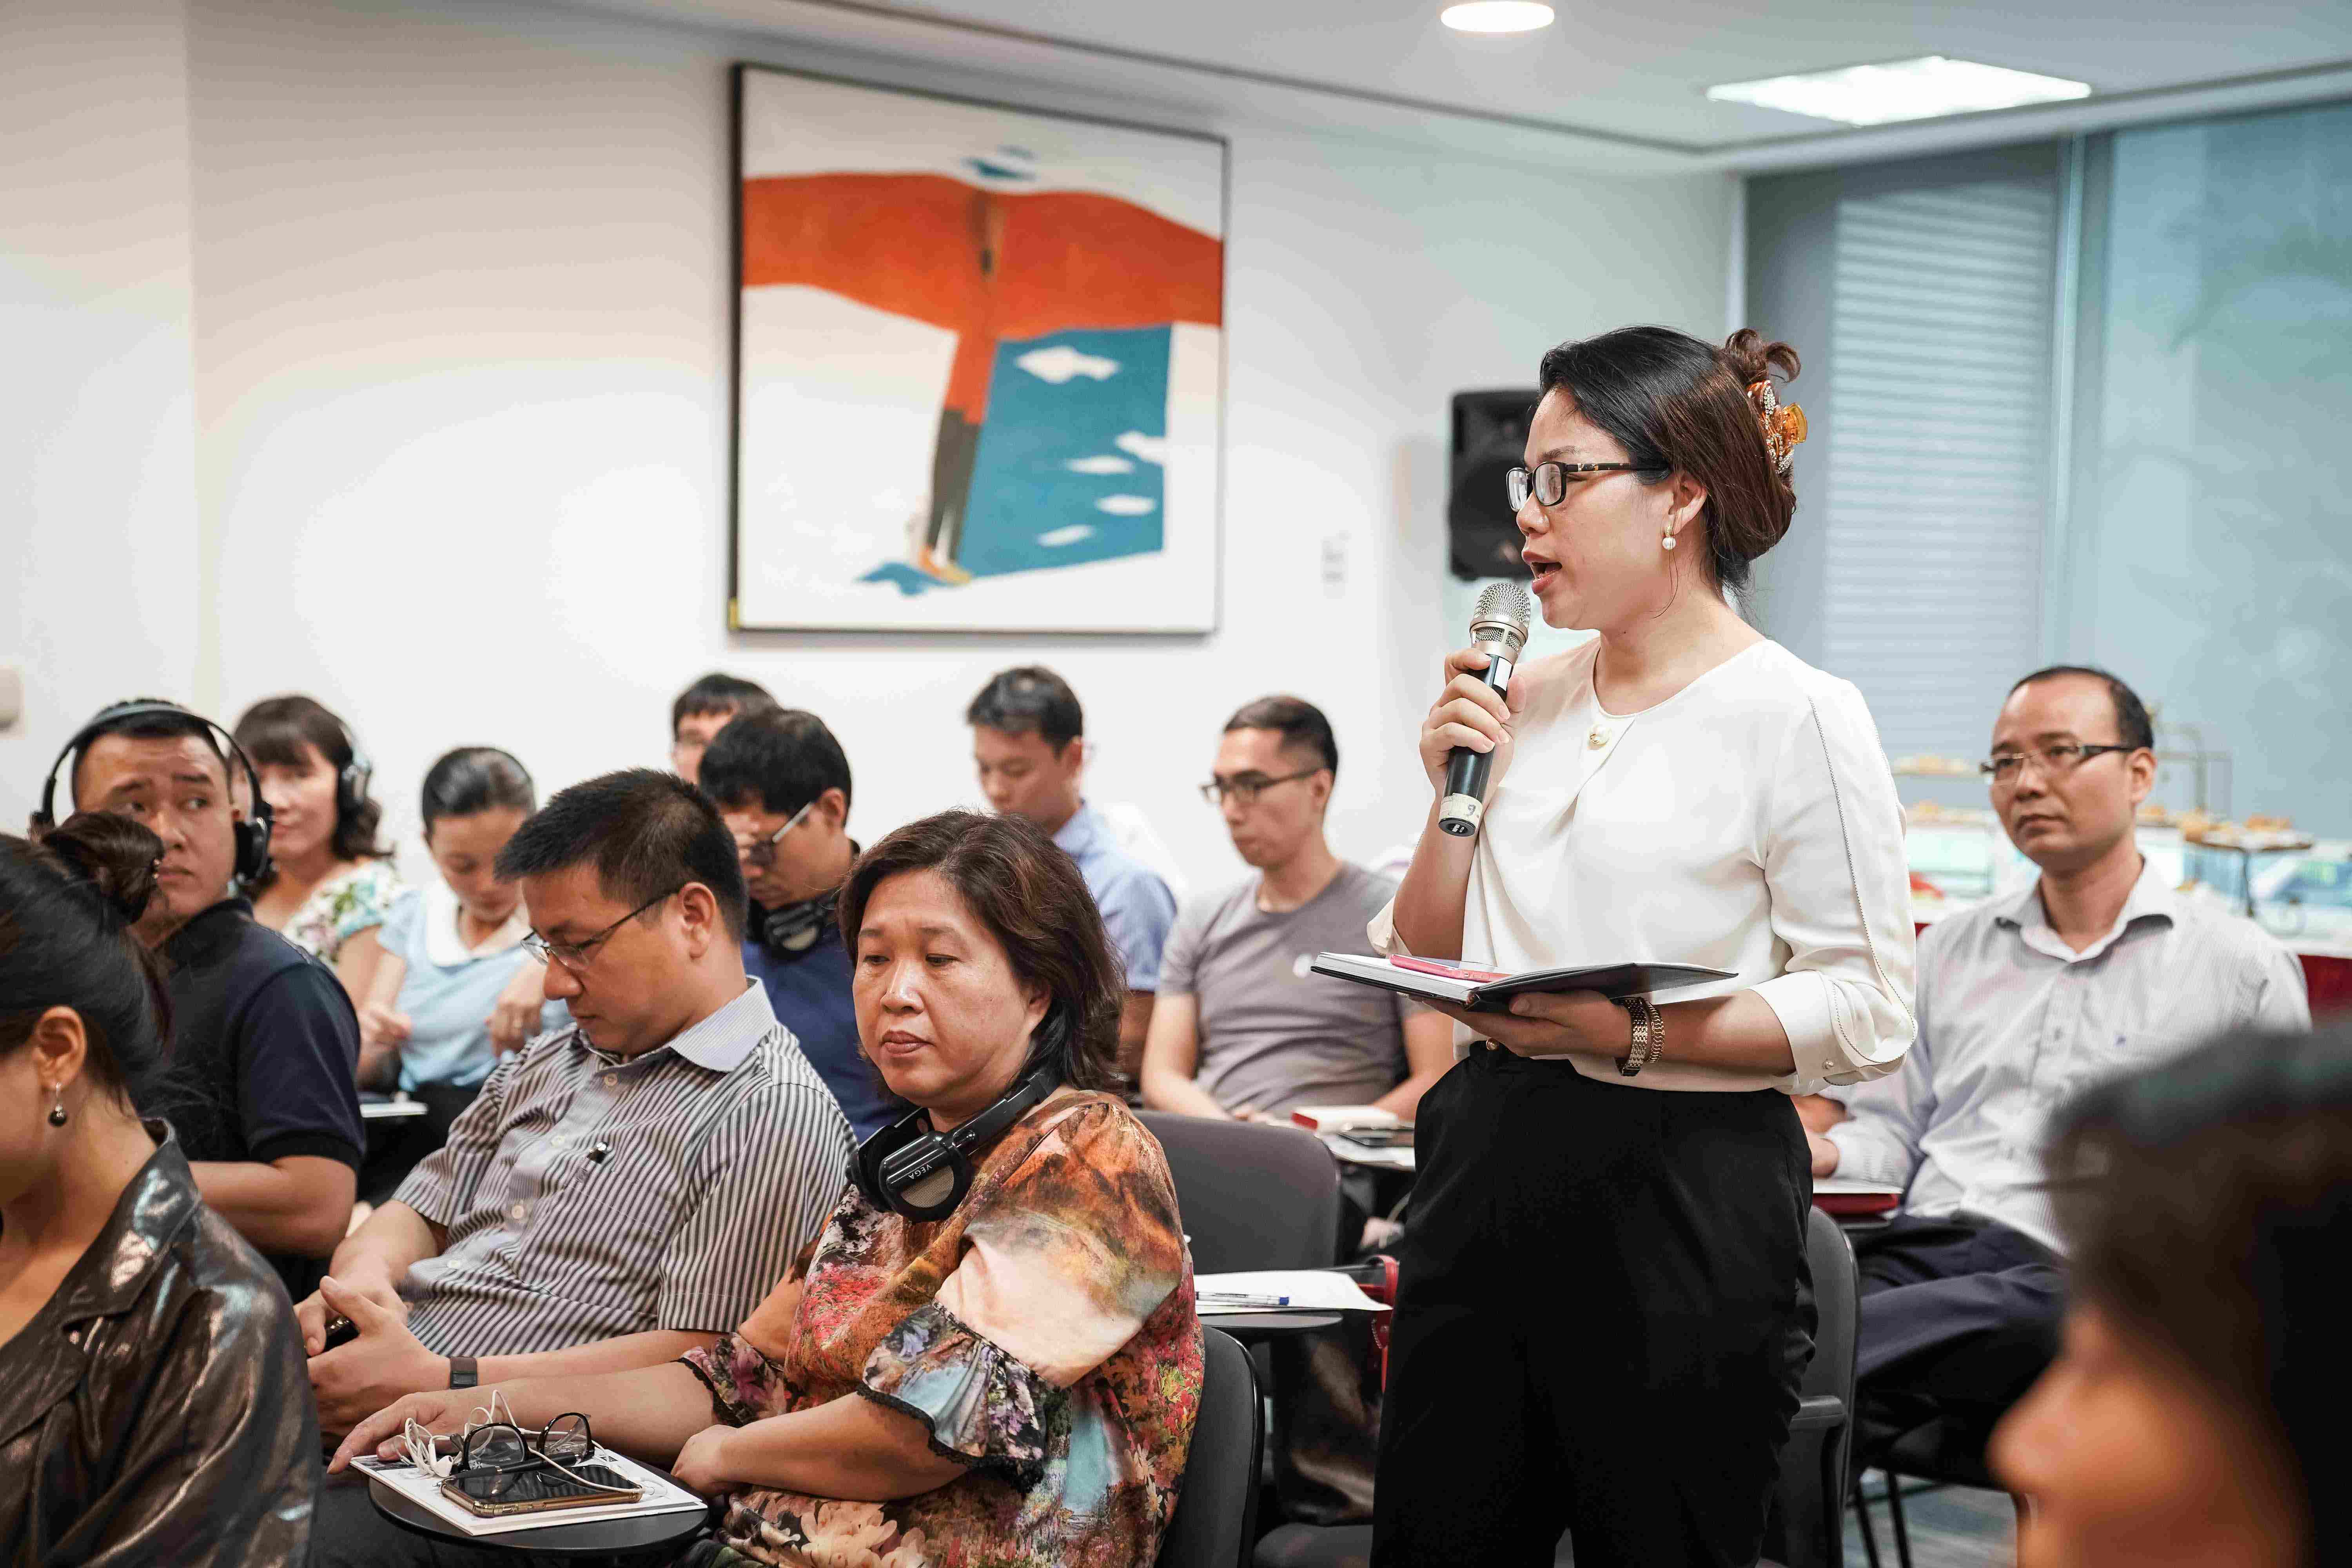 By joining the seminar, the participants gained profound knowledge of blockchain technology.  